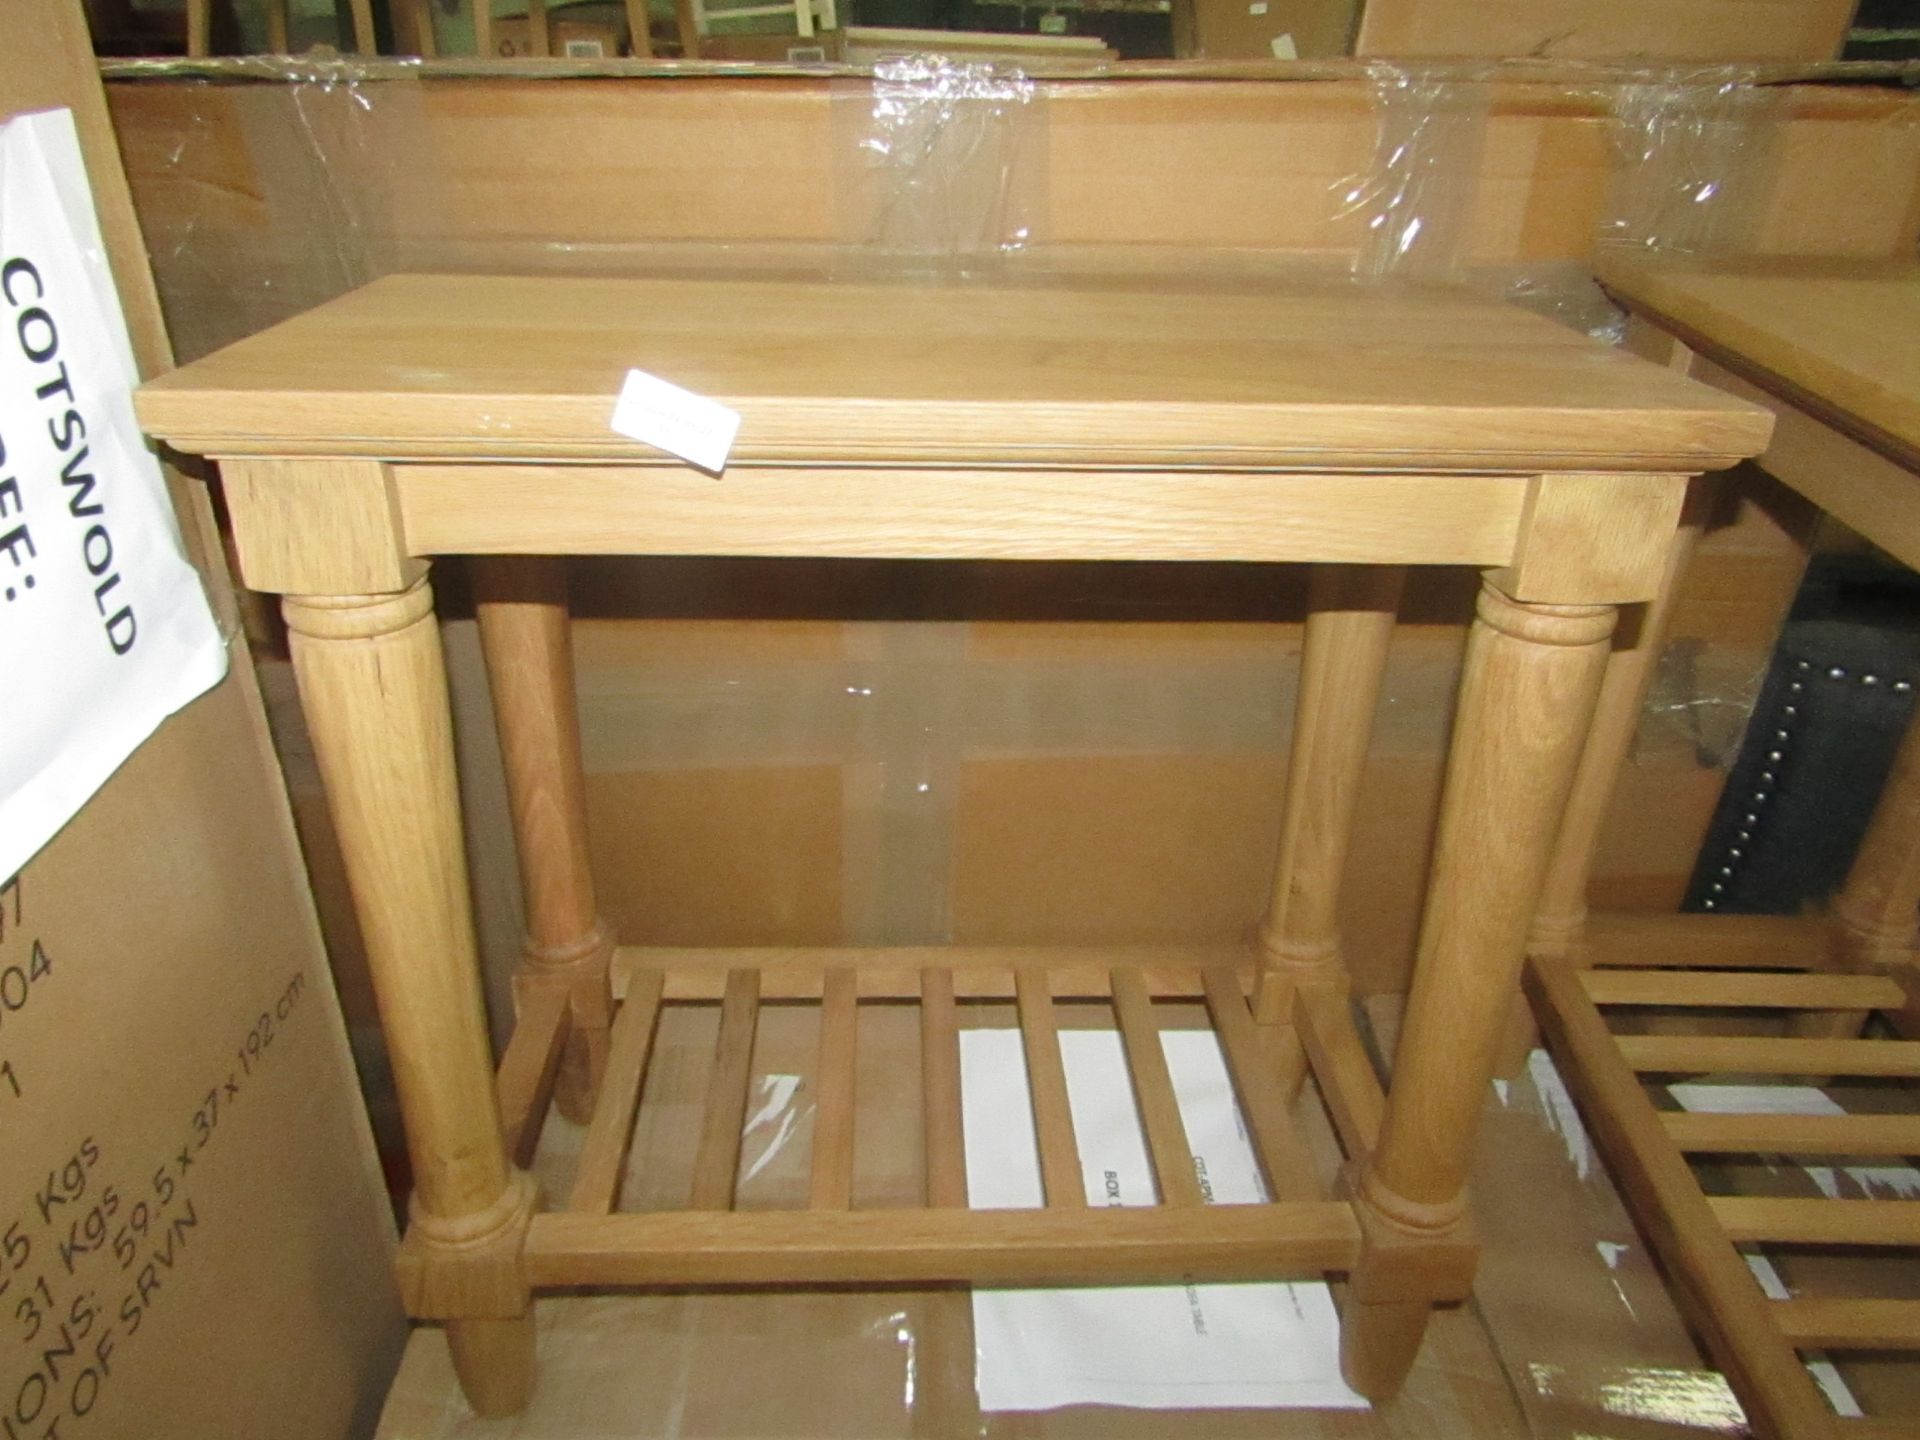 Cotswold Company Elkstone Mellow Oak Sofa Table RRP Â£225.00 - This item looks to be in good